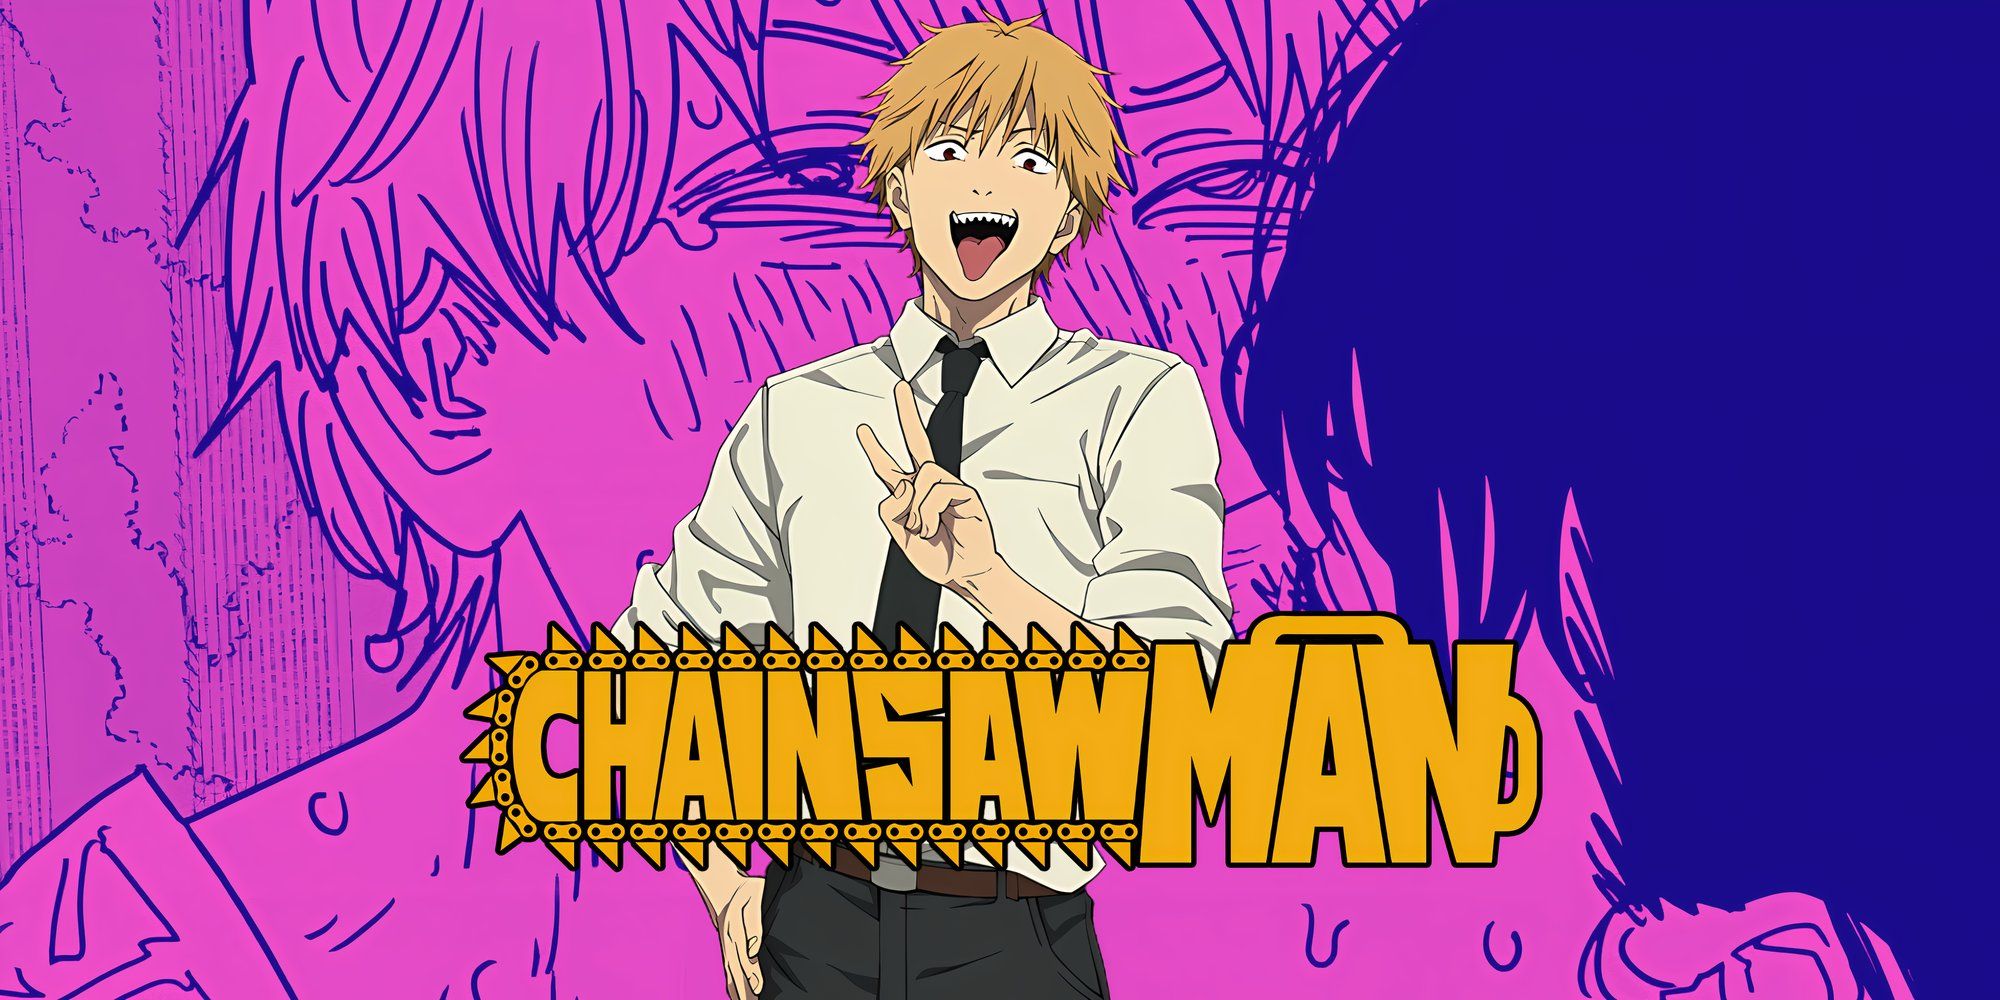 Custom Image of Denji from Chainsaw Man with a panel from Chapter 167 in the background